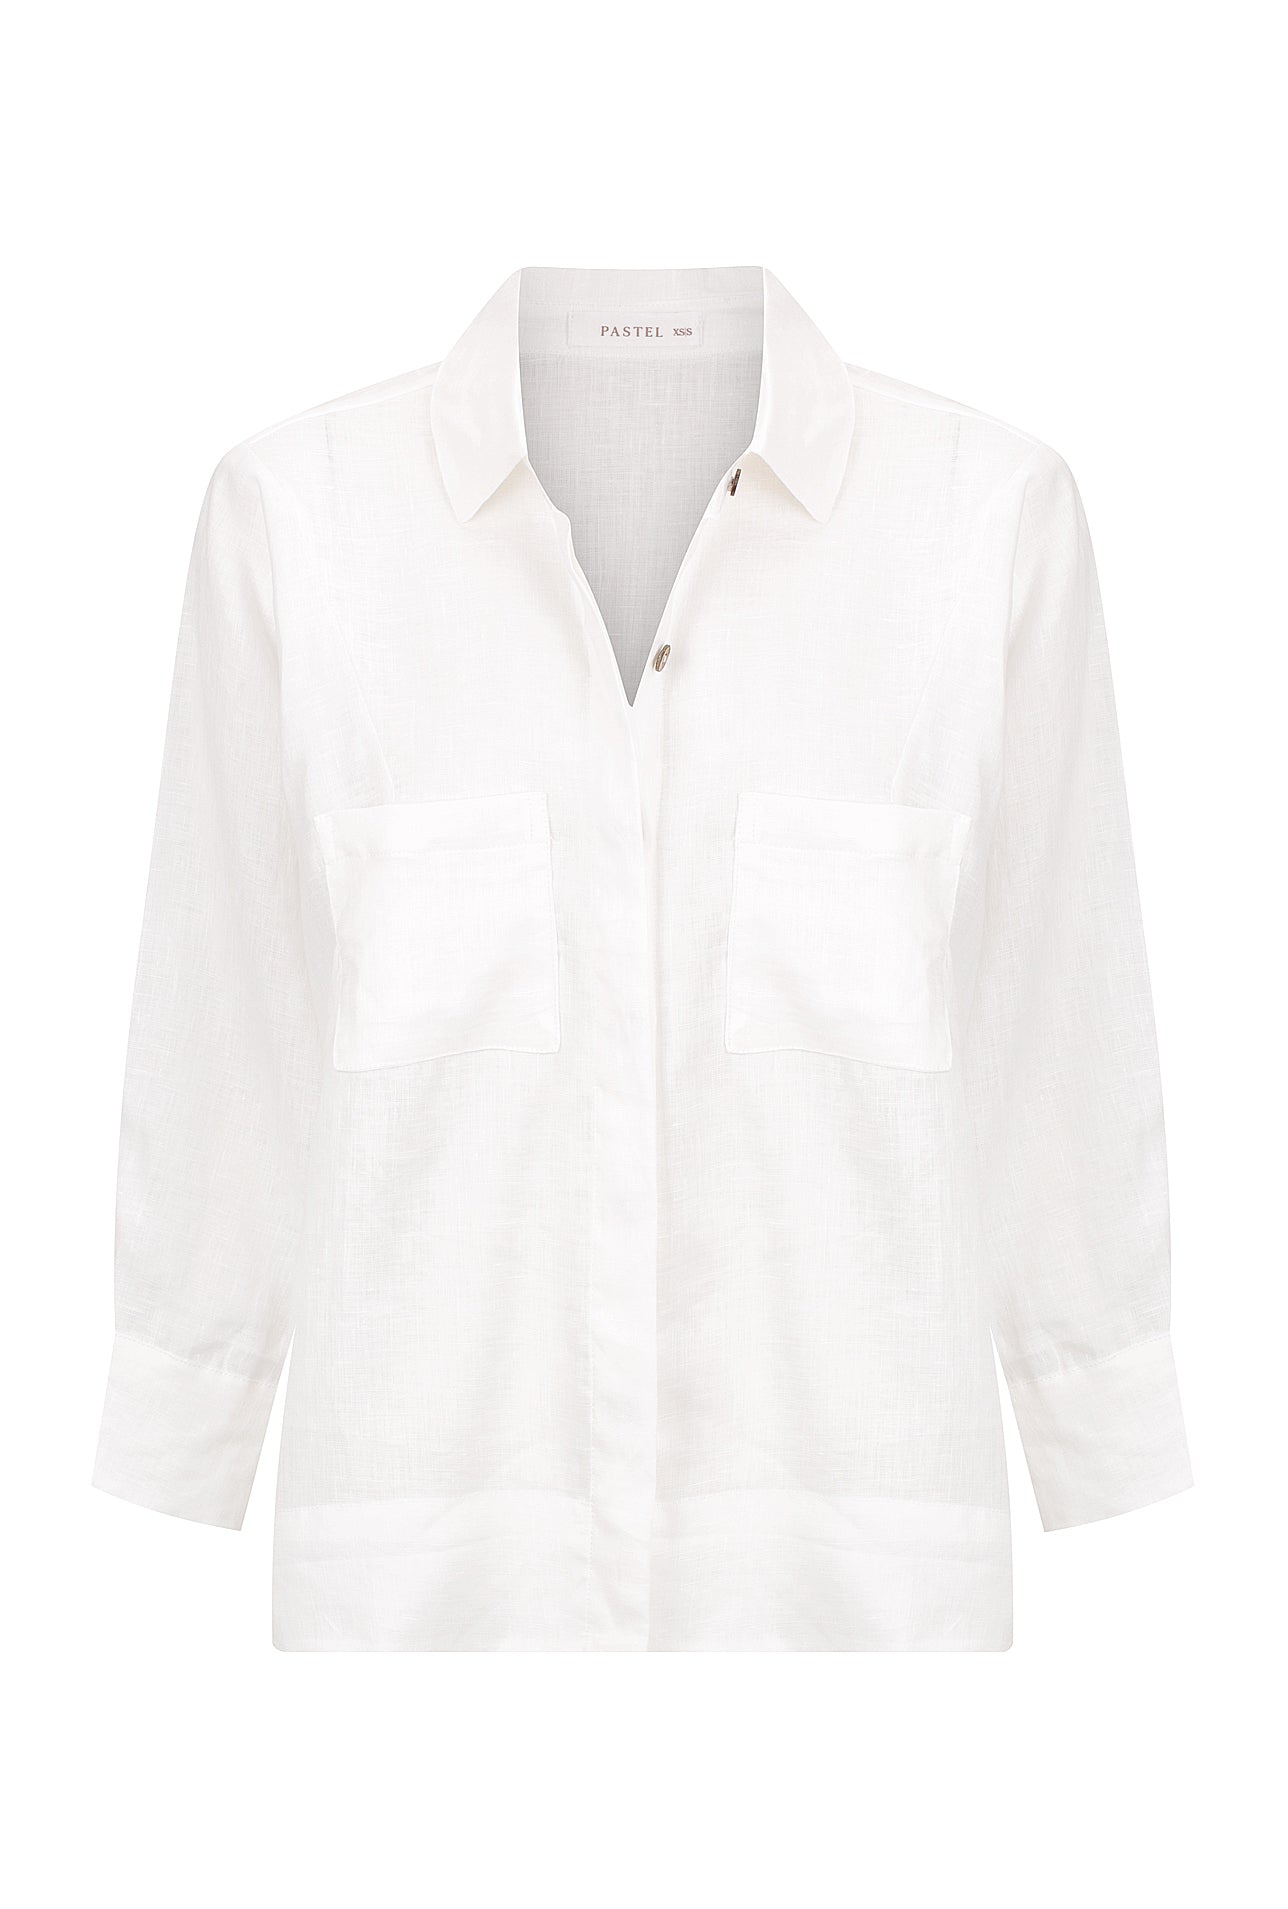 Solana 3/4 Sleeved Button Up Shirt - White